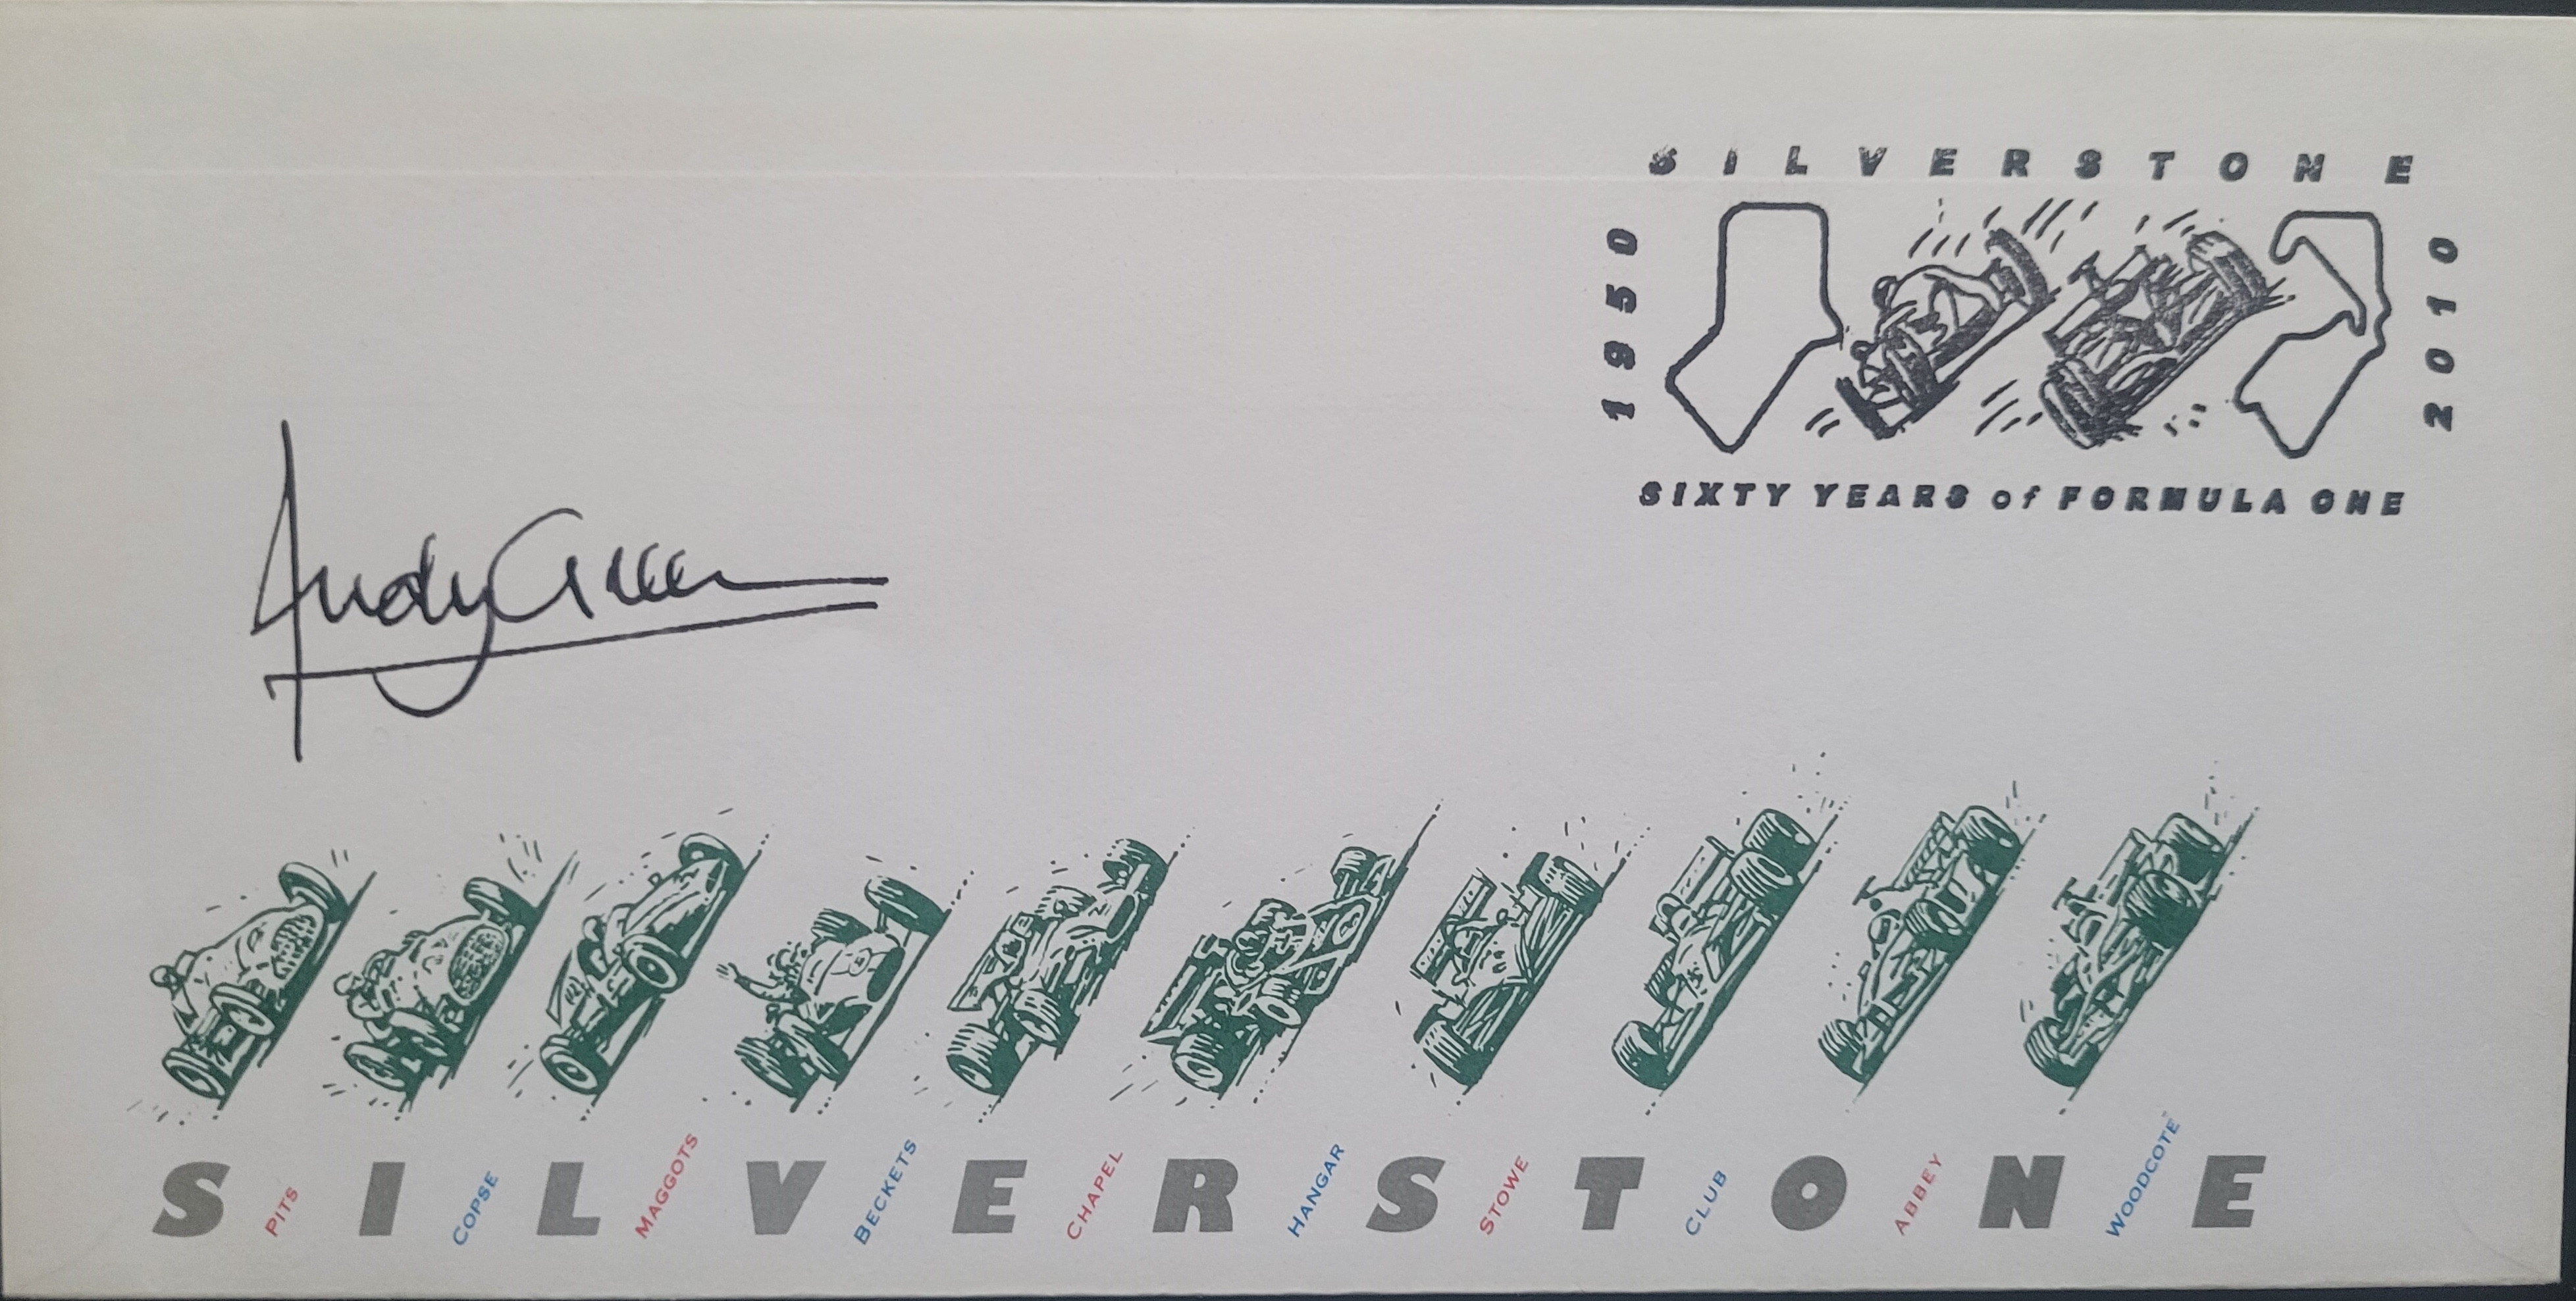 2010 SILVERSTONE LTD EDITION POSTAL COVER AUTOGRAPHED BY ANDY GREEN LAND SPEED WORLD RECORD HOLDER